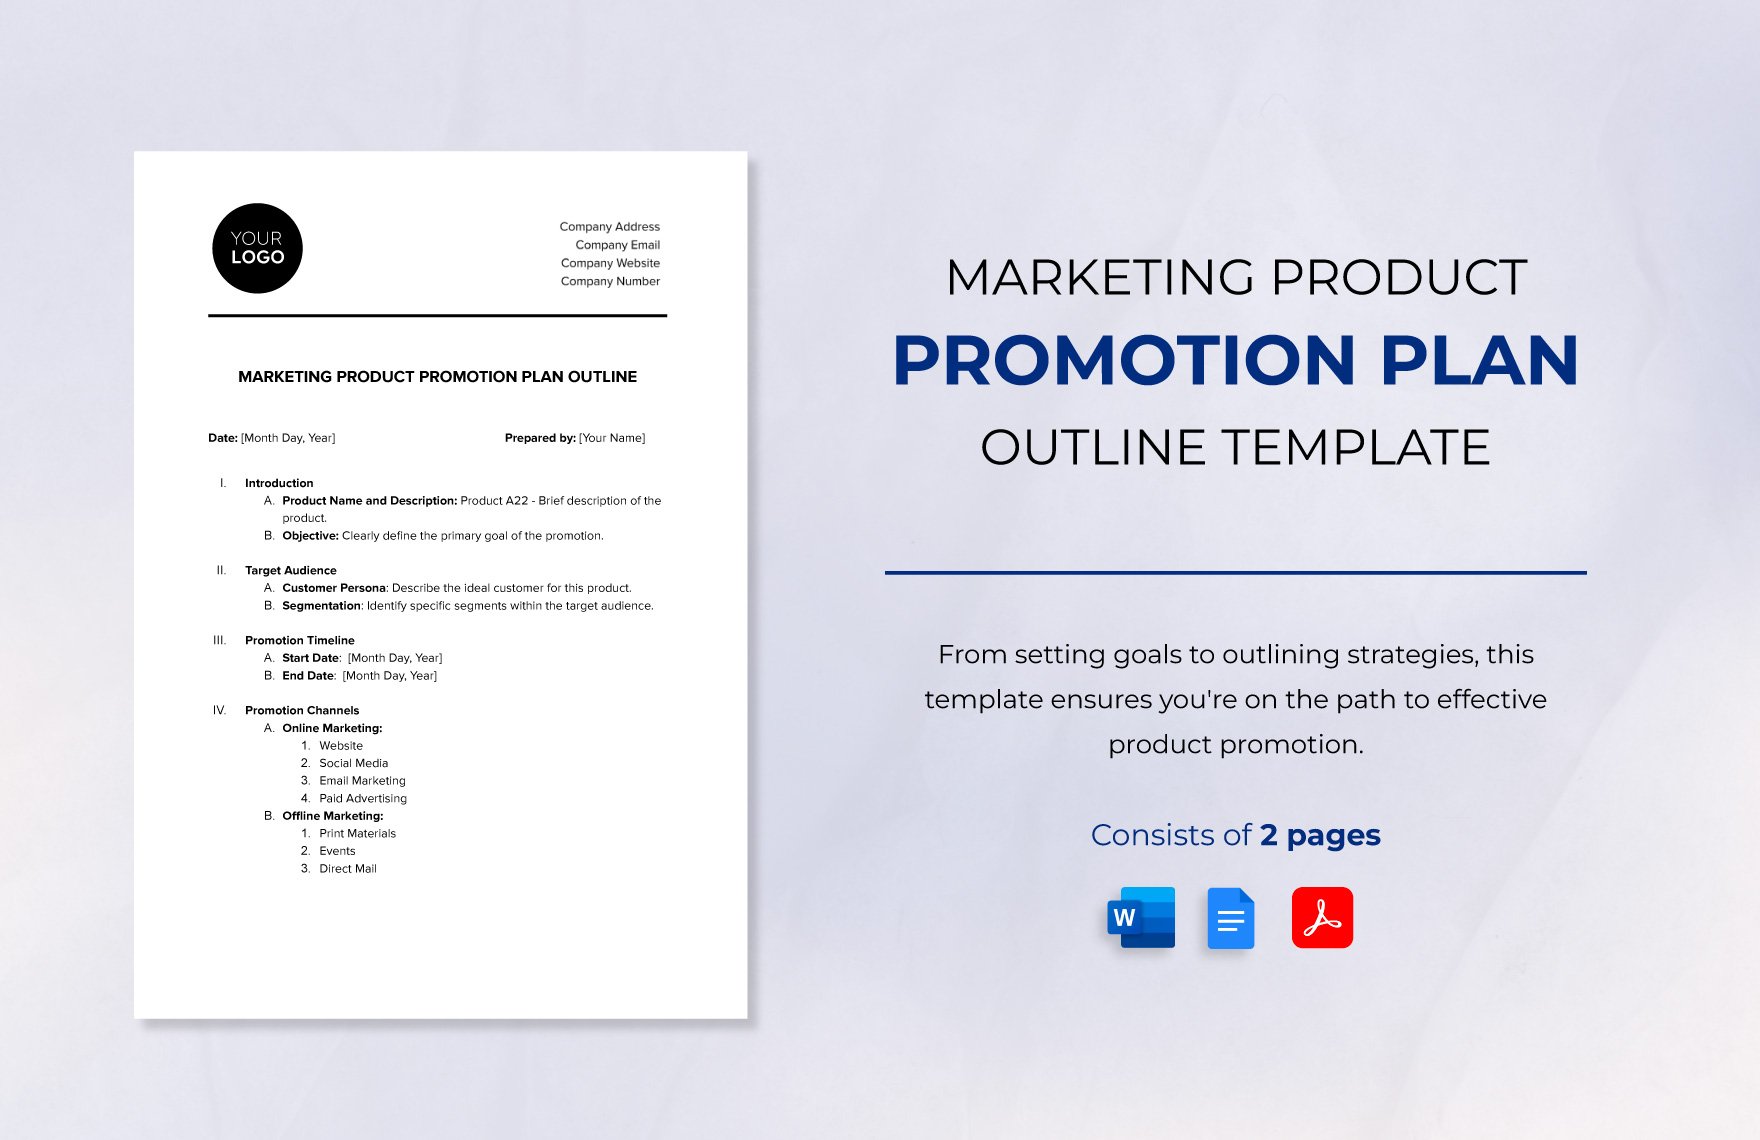 Marketing Product Promotion Plan Outline Template in Word, Google Docs, PDF